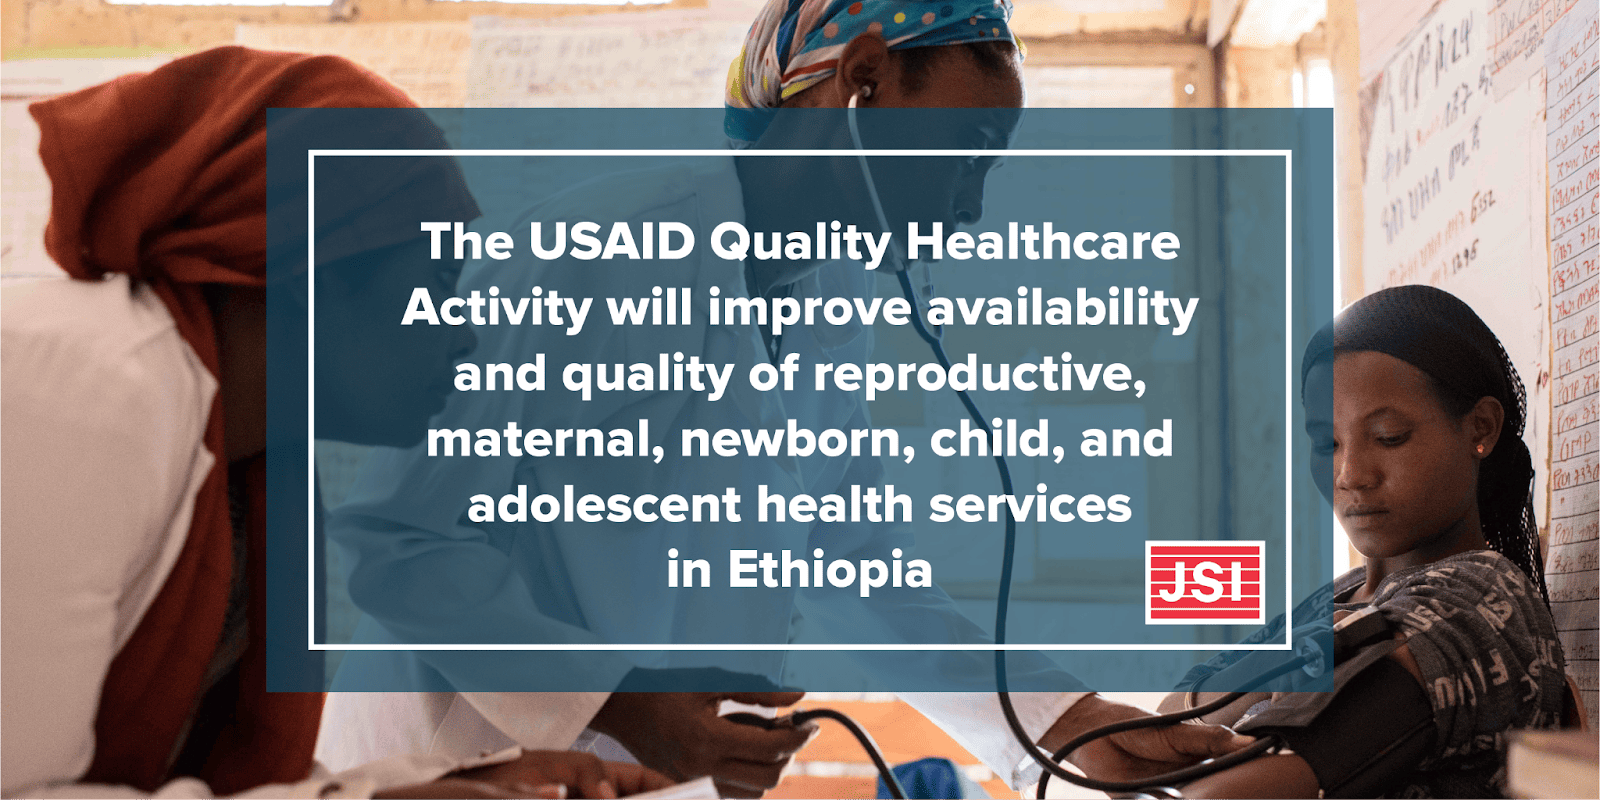 USAID Quality Healthcare Activity Furthers Health Equity in Ethiopia